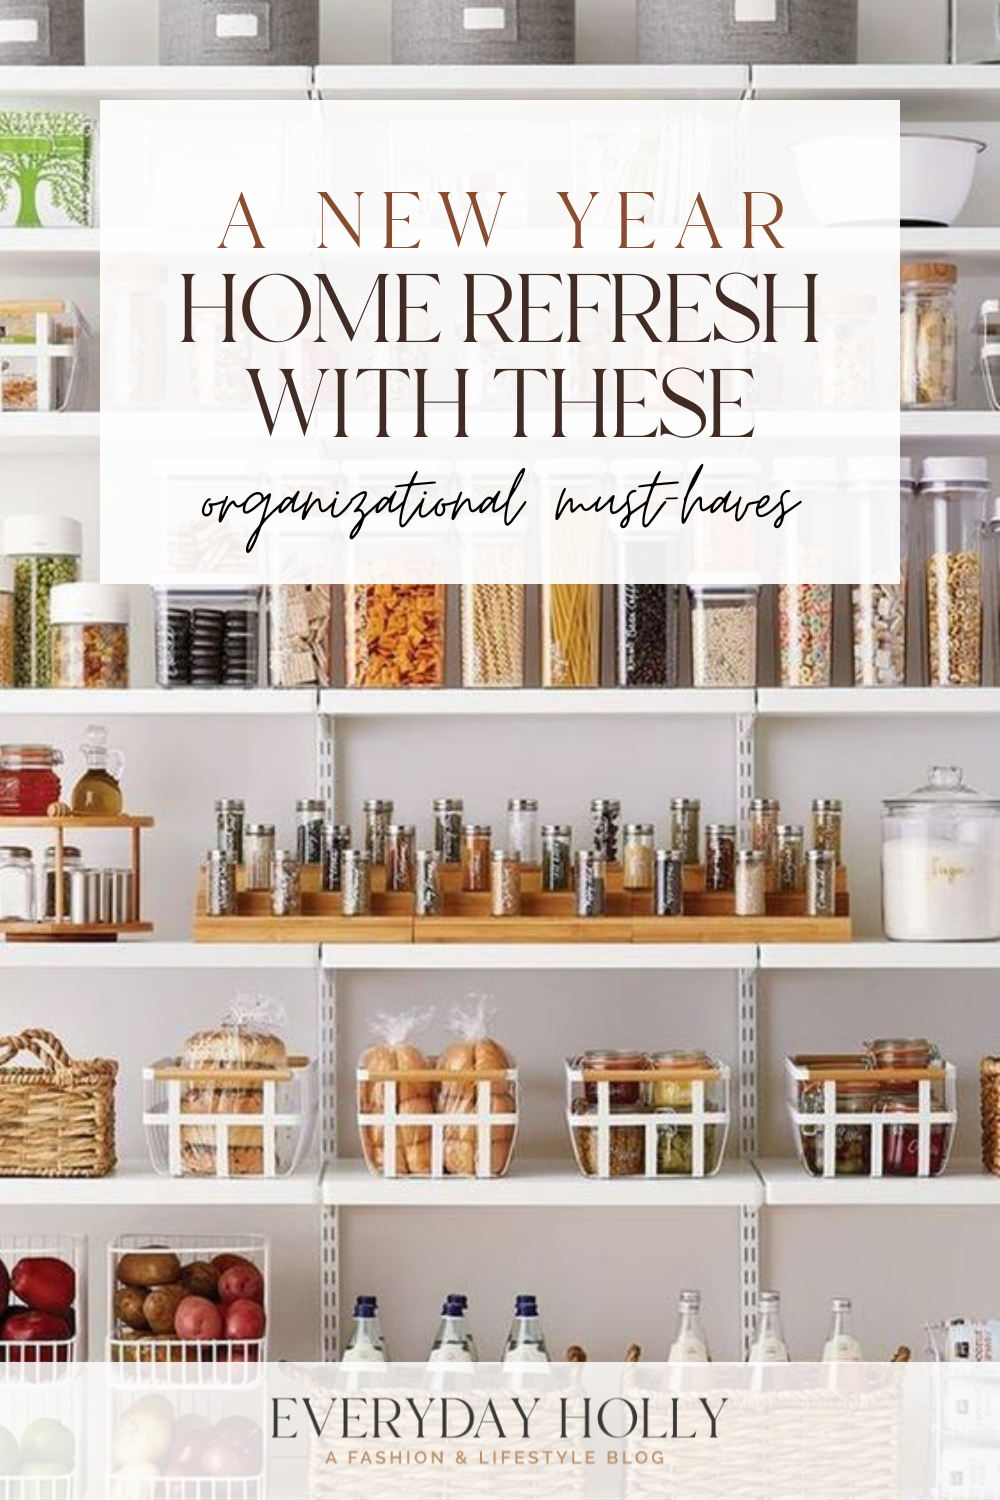 new year home refresh with these organizational must haves | new year, home refresh, home organization, organization, storage, pantry organization, closet organization